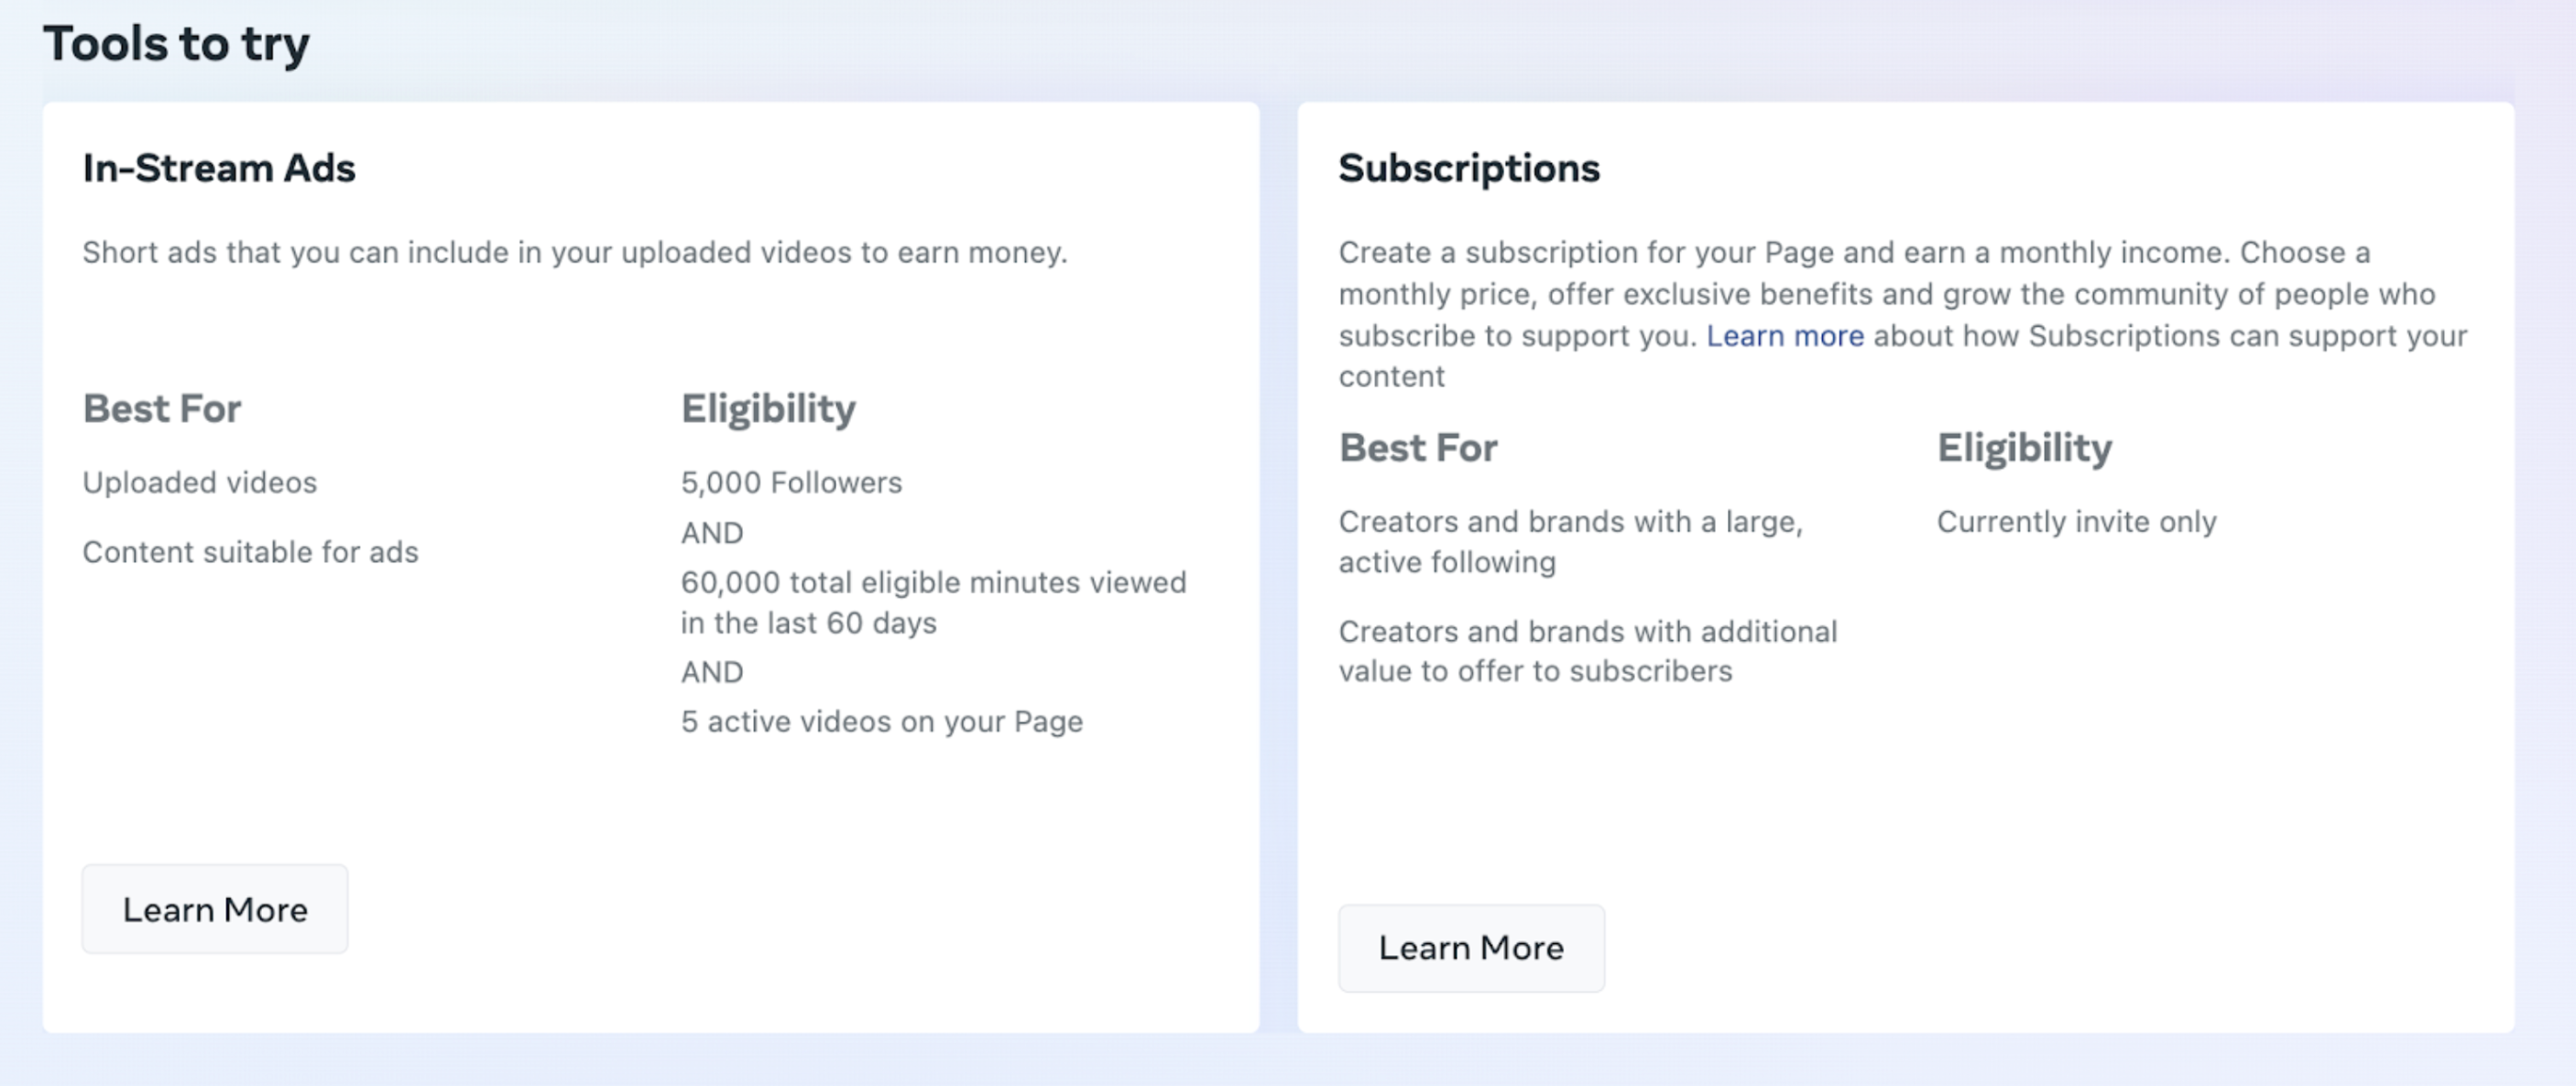 Recommended tools in the Monetization tab in Creator Studio. The image shows two tools, in-stream ads and subscriptions and mentions who they’re best for and eligibility.